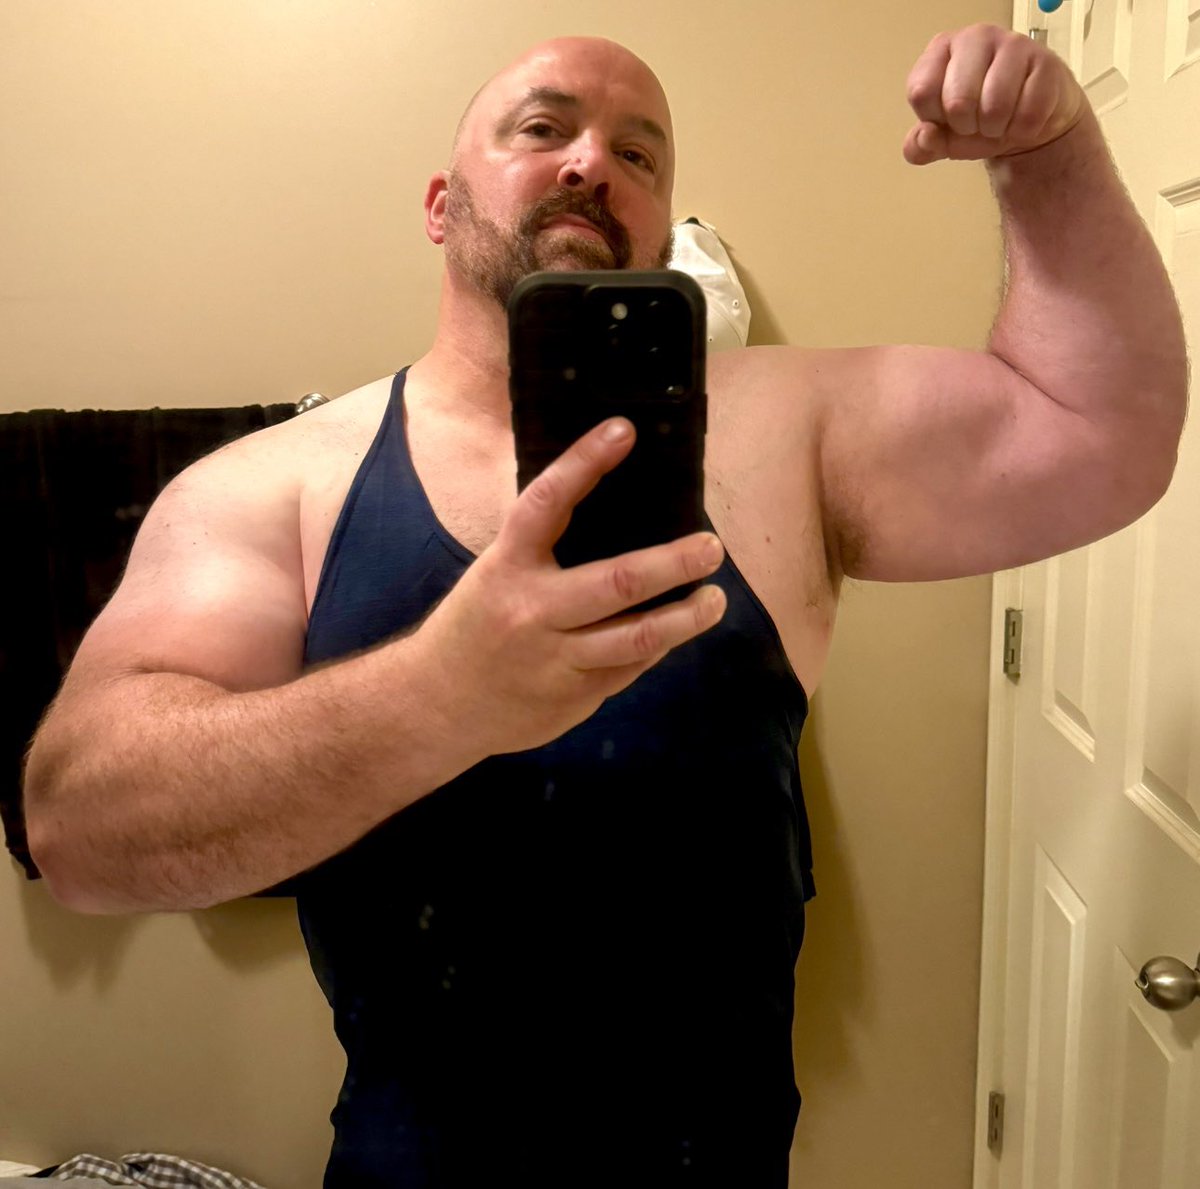 Hilton Head, SC in nine days. Gotta try and be beach-ready! Long way to go! 😂 First-off, the farmer’s tan has got to go. 🤣 🏖️ 🏝️ 🌊 Gotta tone up my fat arse. 💪🏻 Gym every day til we take off ✈️ #vacation @AdvUro #lowT #lowTawareness #lowTtreatment #lowTtherapy